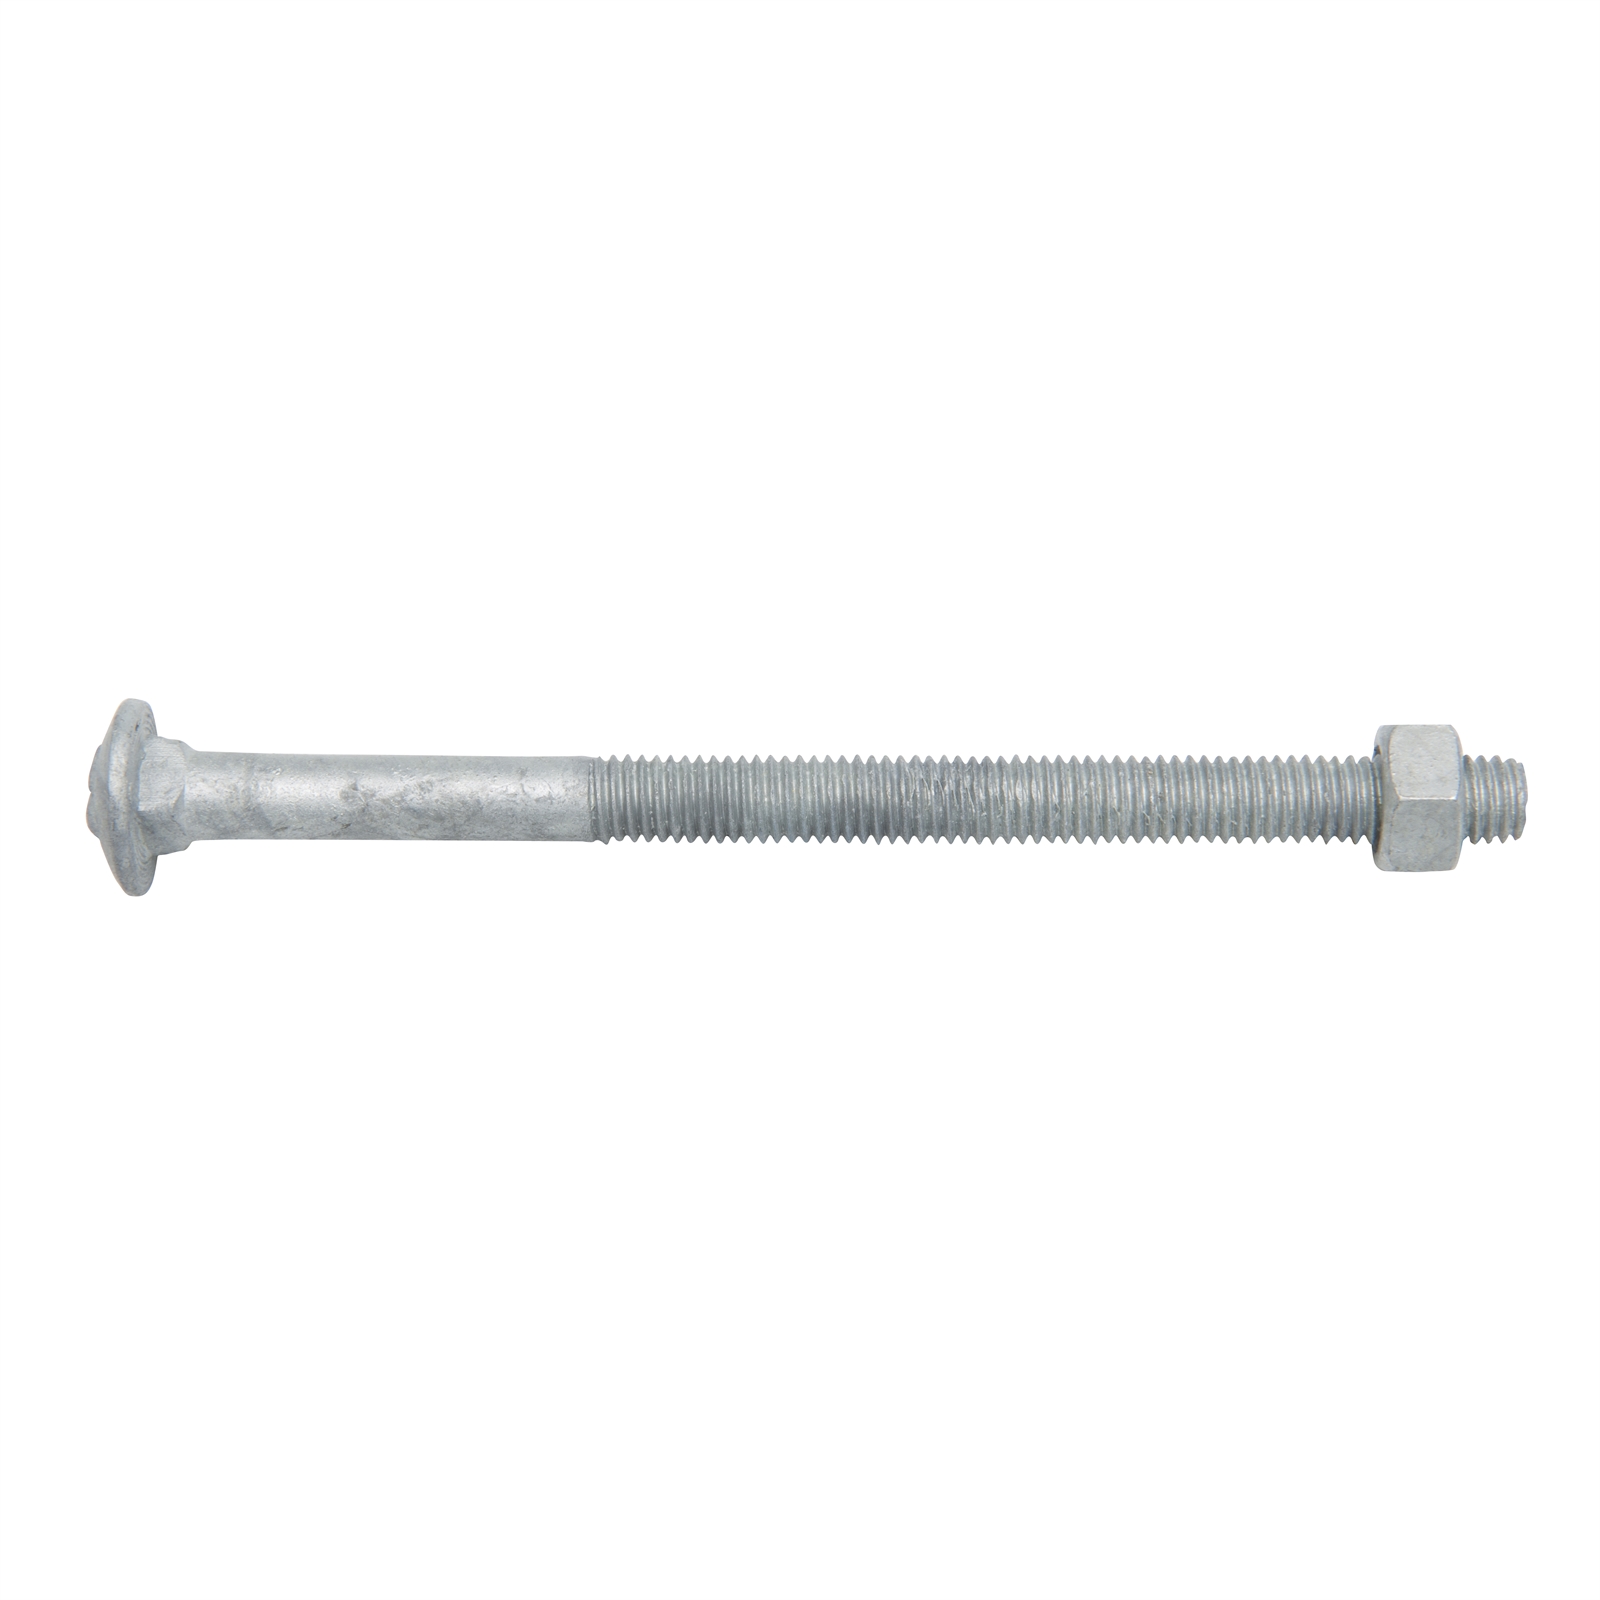 Zenith M8 x 120mm Galvanised Cup Head Bolt and Nut